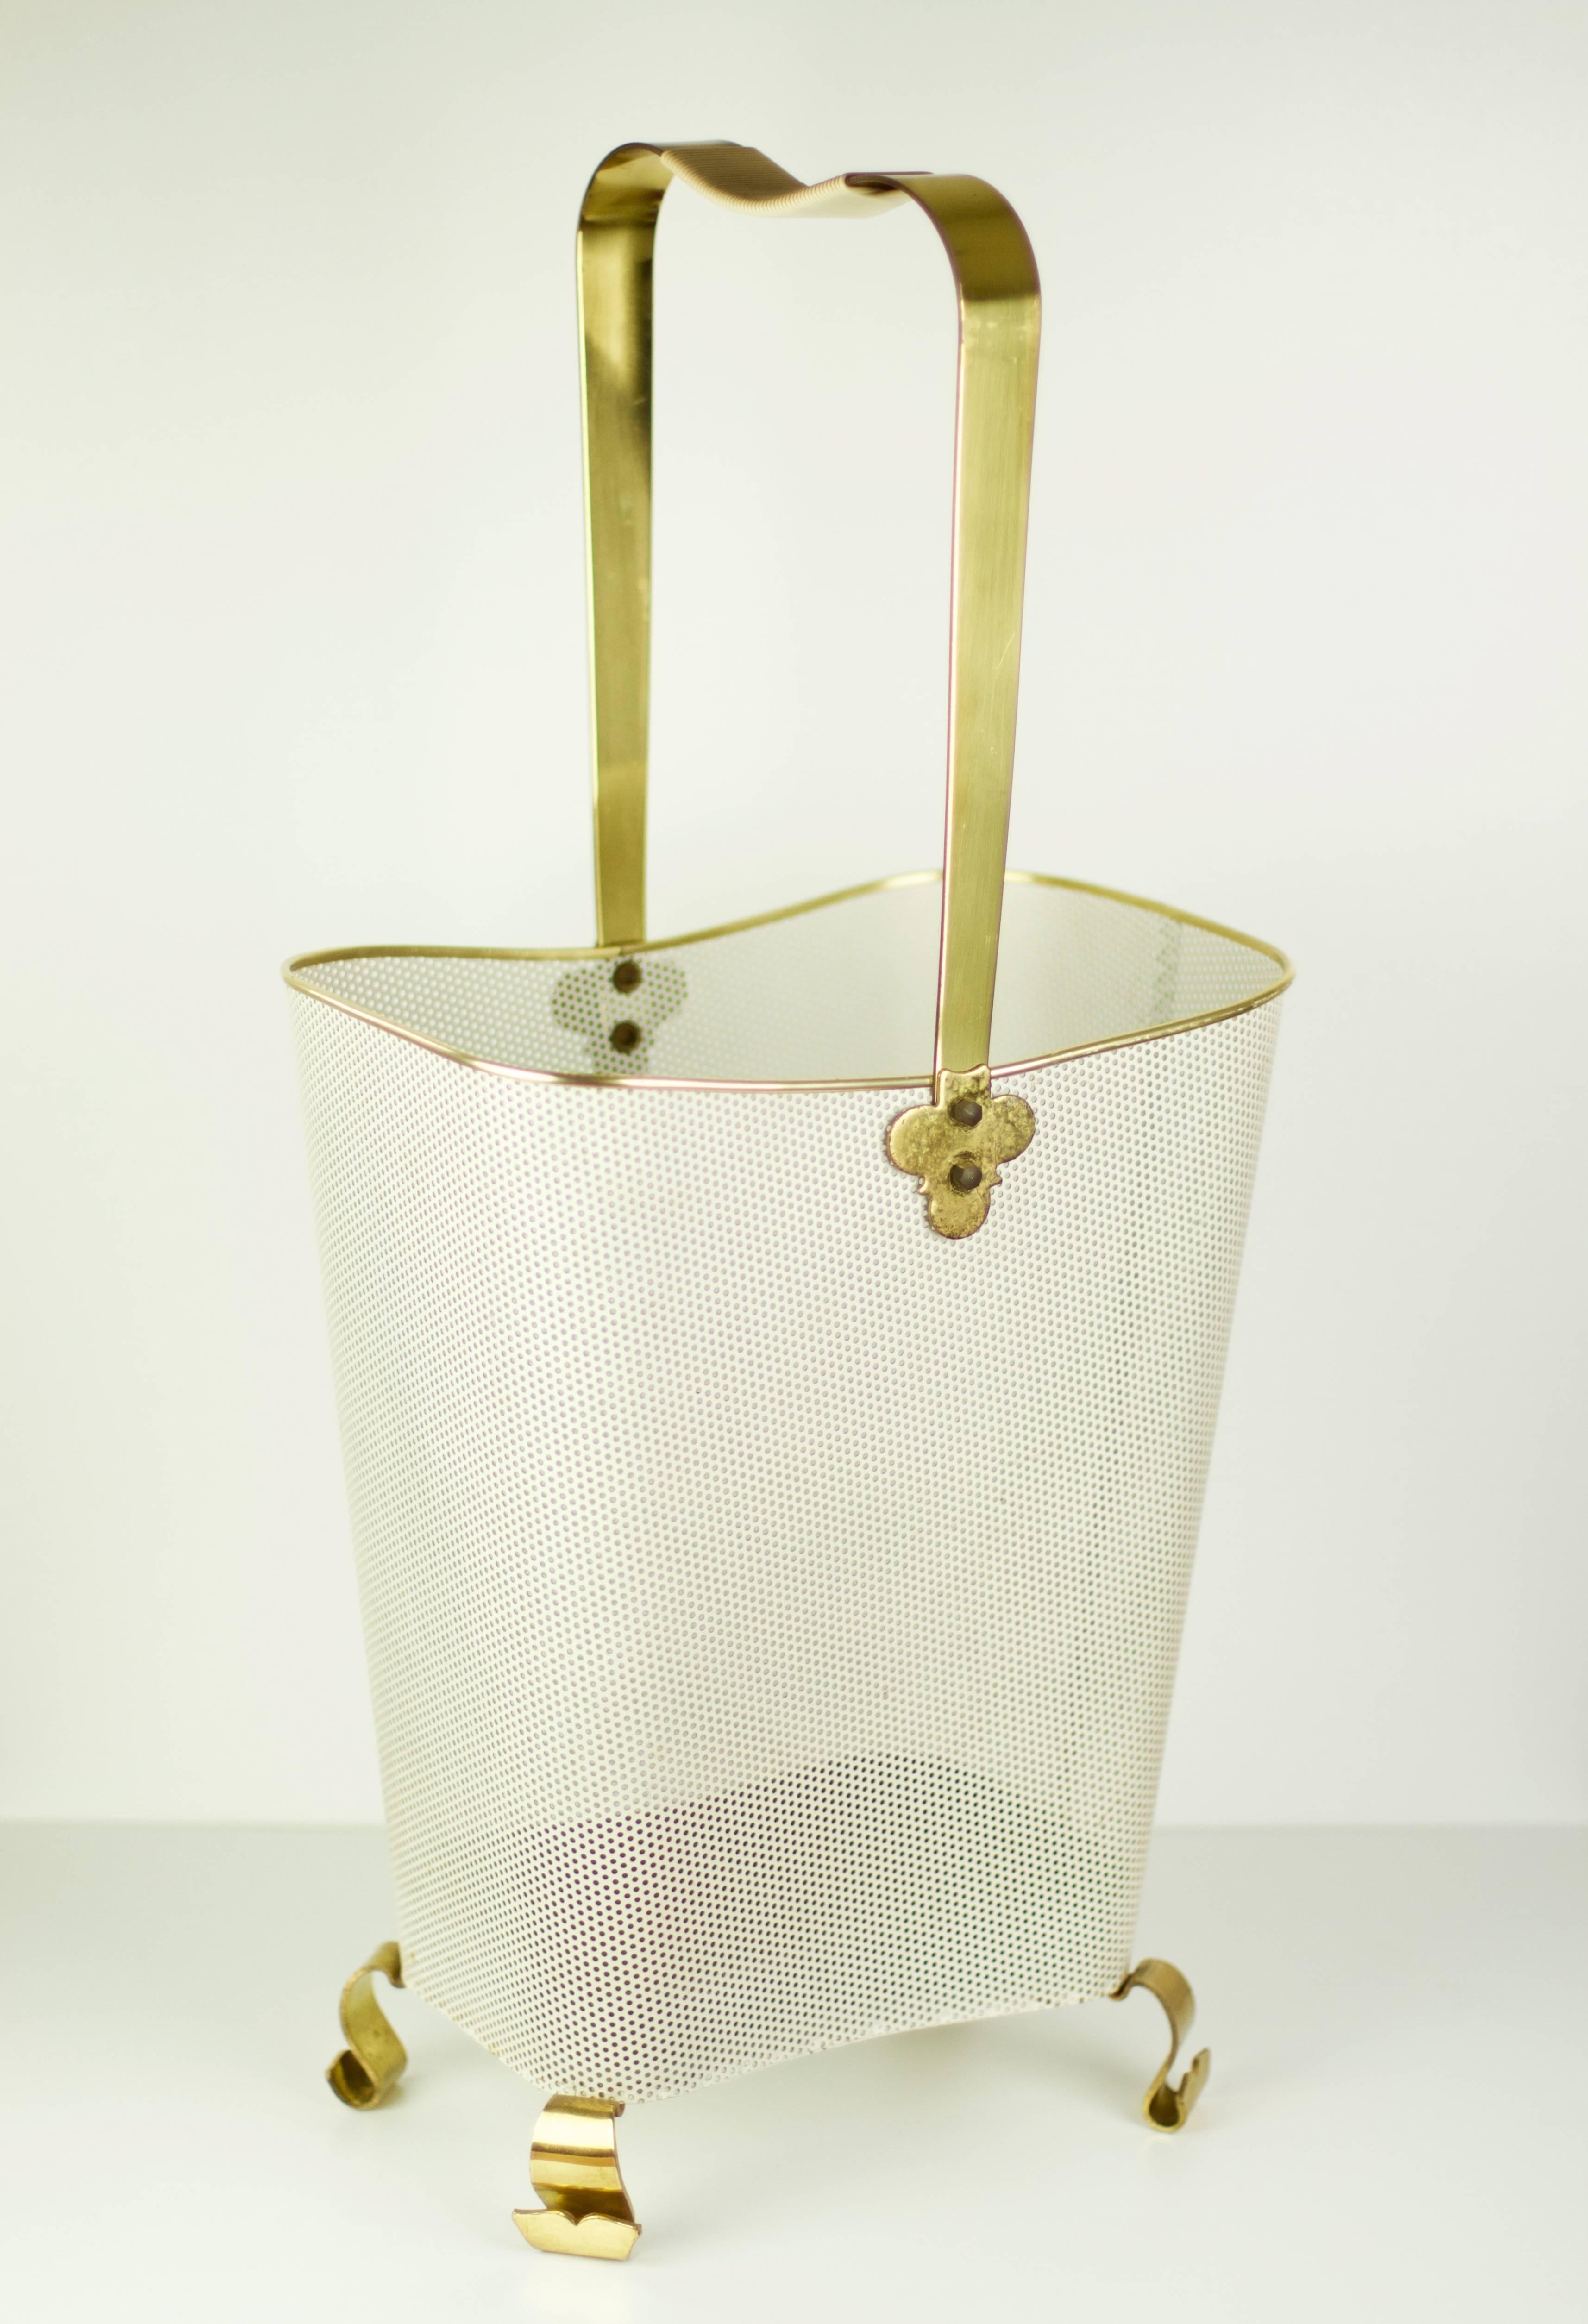 Mathieu Matégot style Mid-Century umbrella stand.

The white perforated metal basket is a classic style of Mategot and the beautifully crafted curved brass feet and delicate handle finals give the piece a unique and luxurious feel and are very